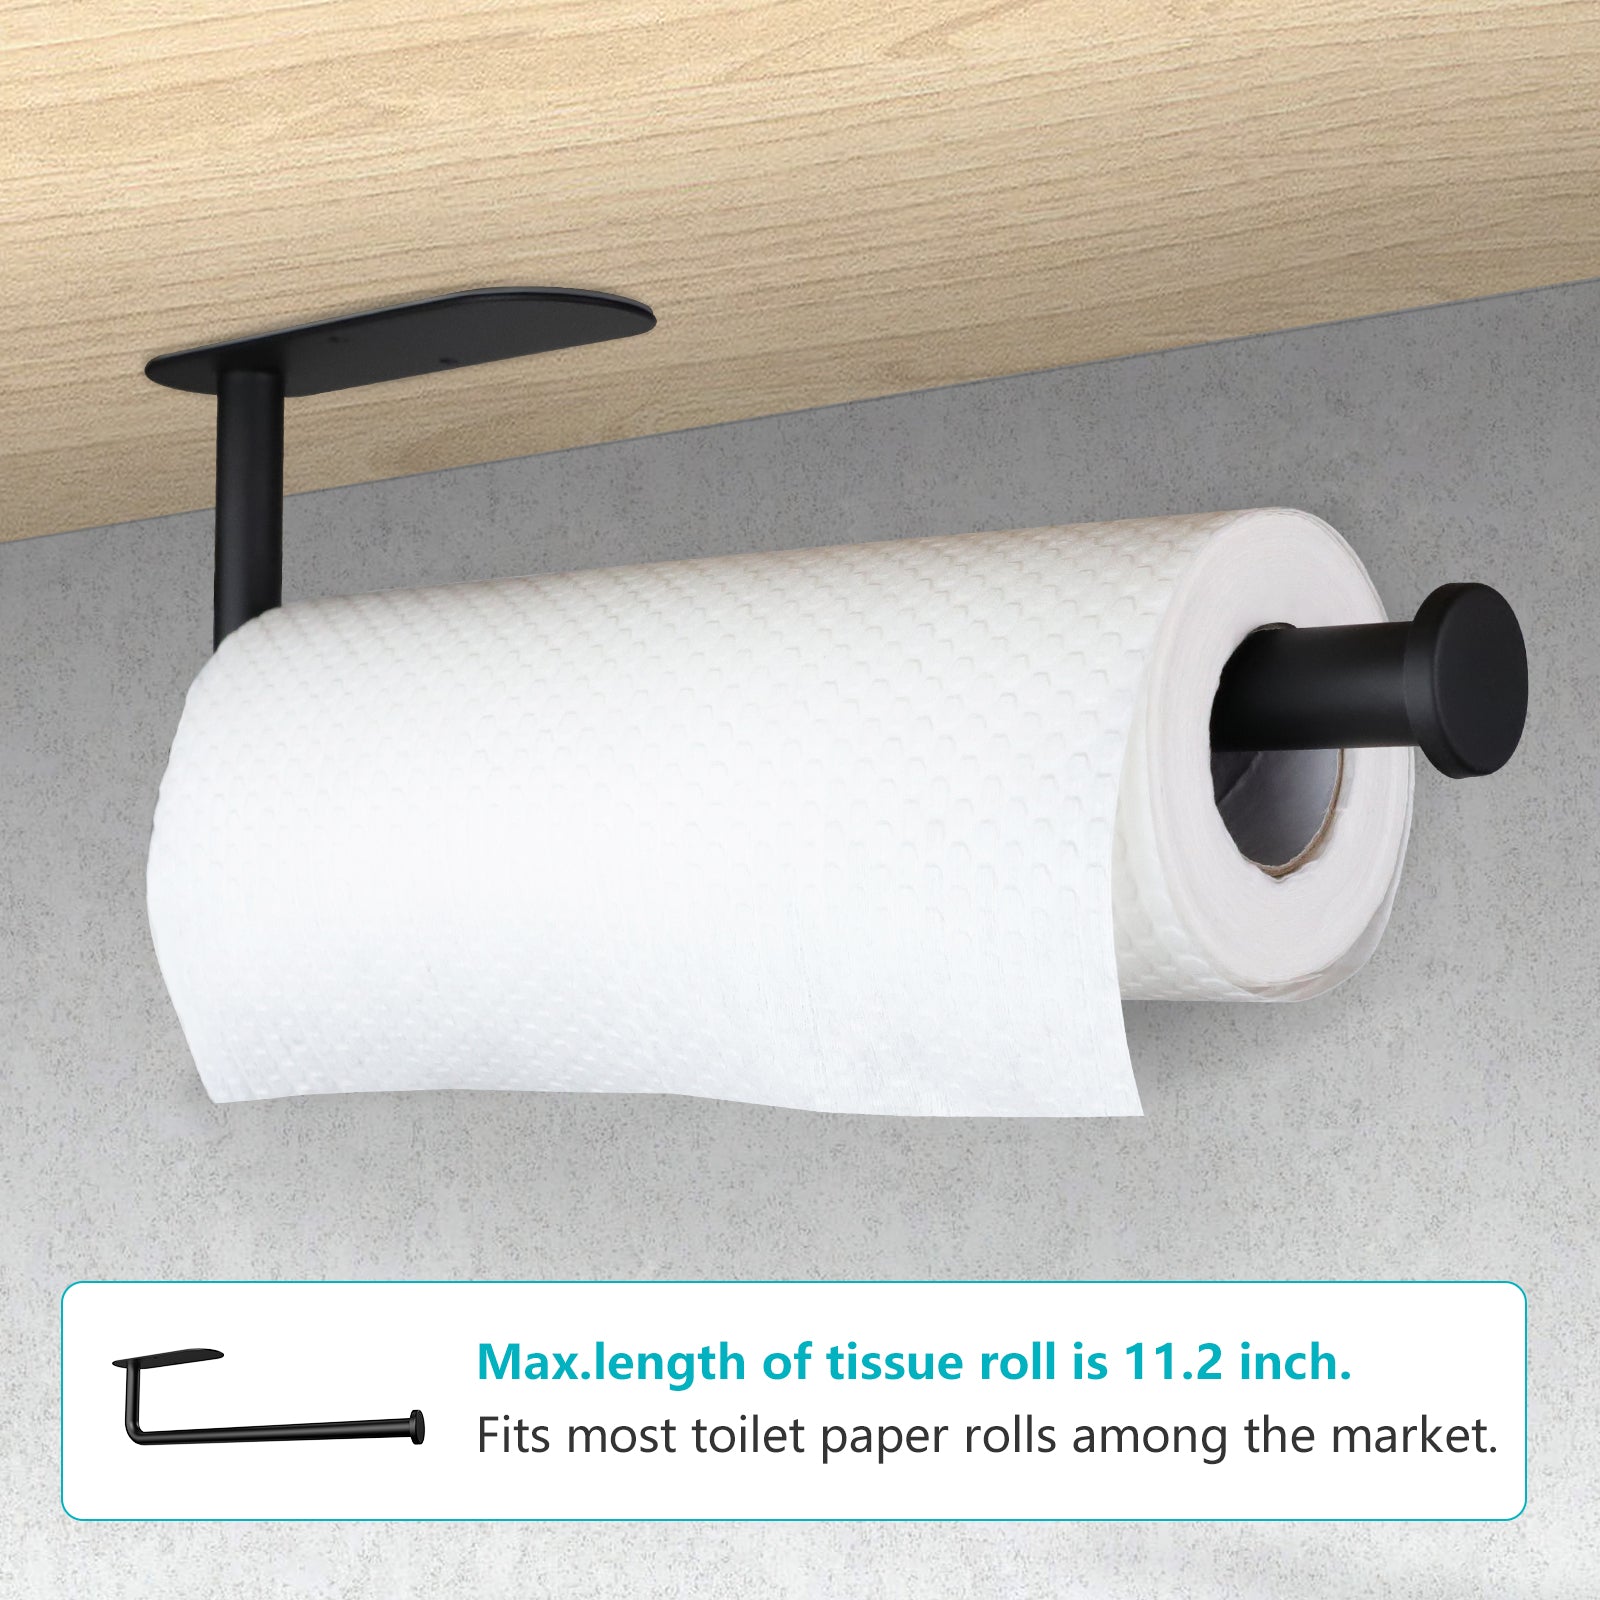 Self-adhesive Under Cabinet Paper Roll Rack Towel Holder Tissue